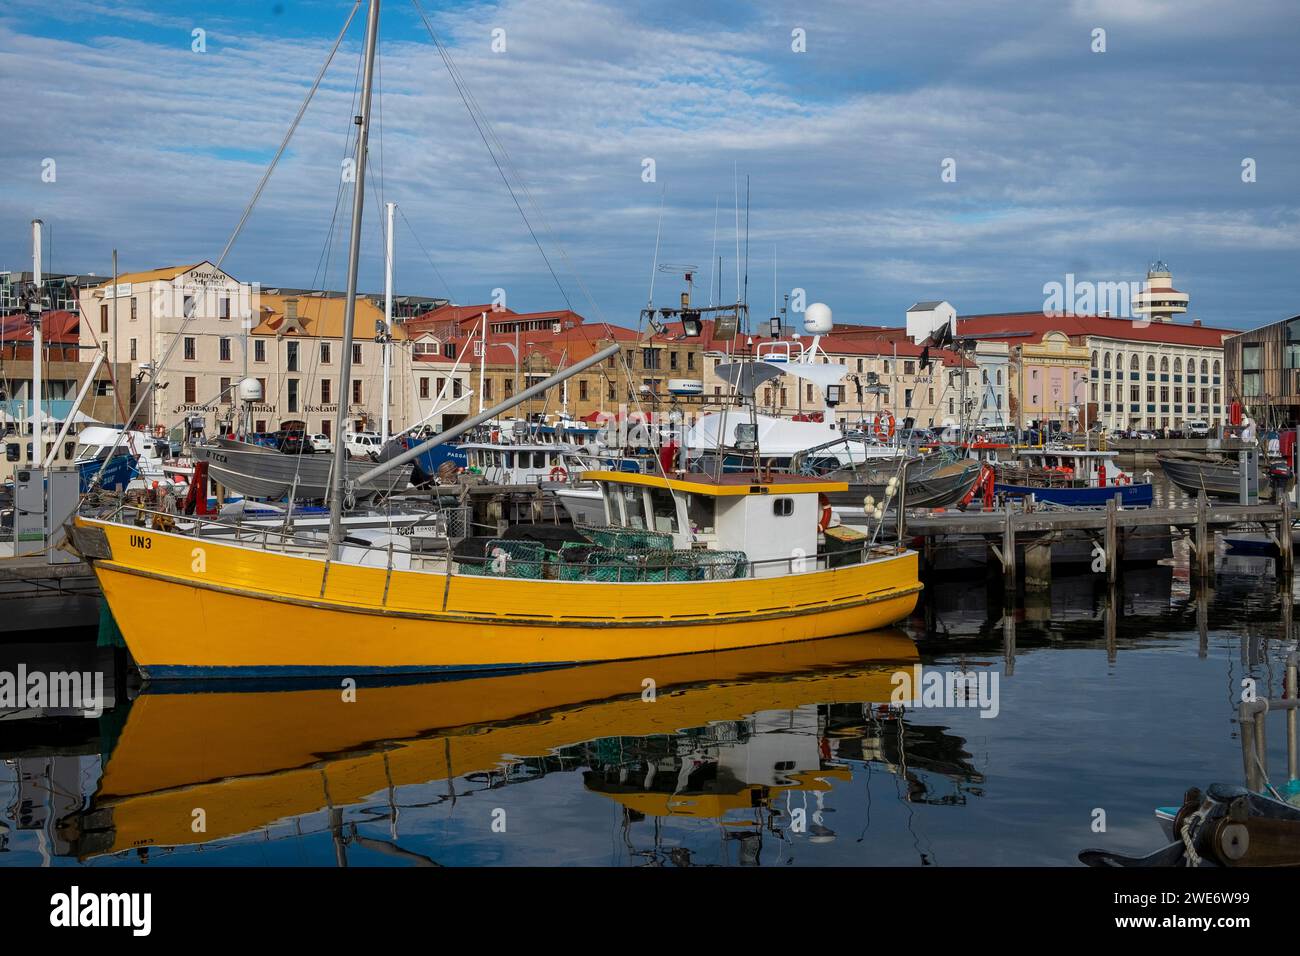 Fishing boats and old warehouse buildings on the Hobart waterfront, in Tasmania Stock Photo